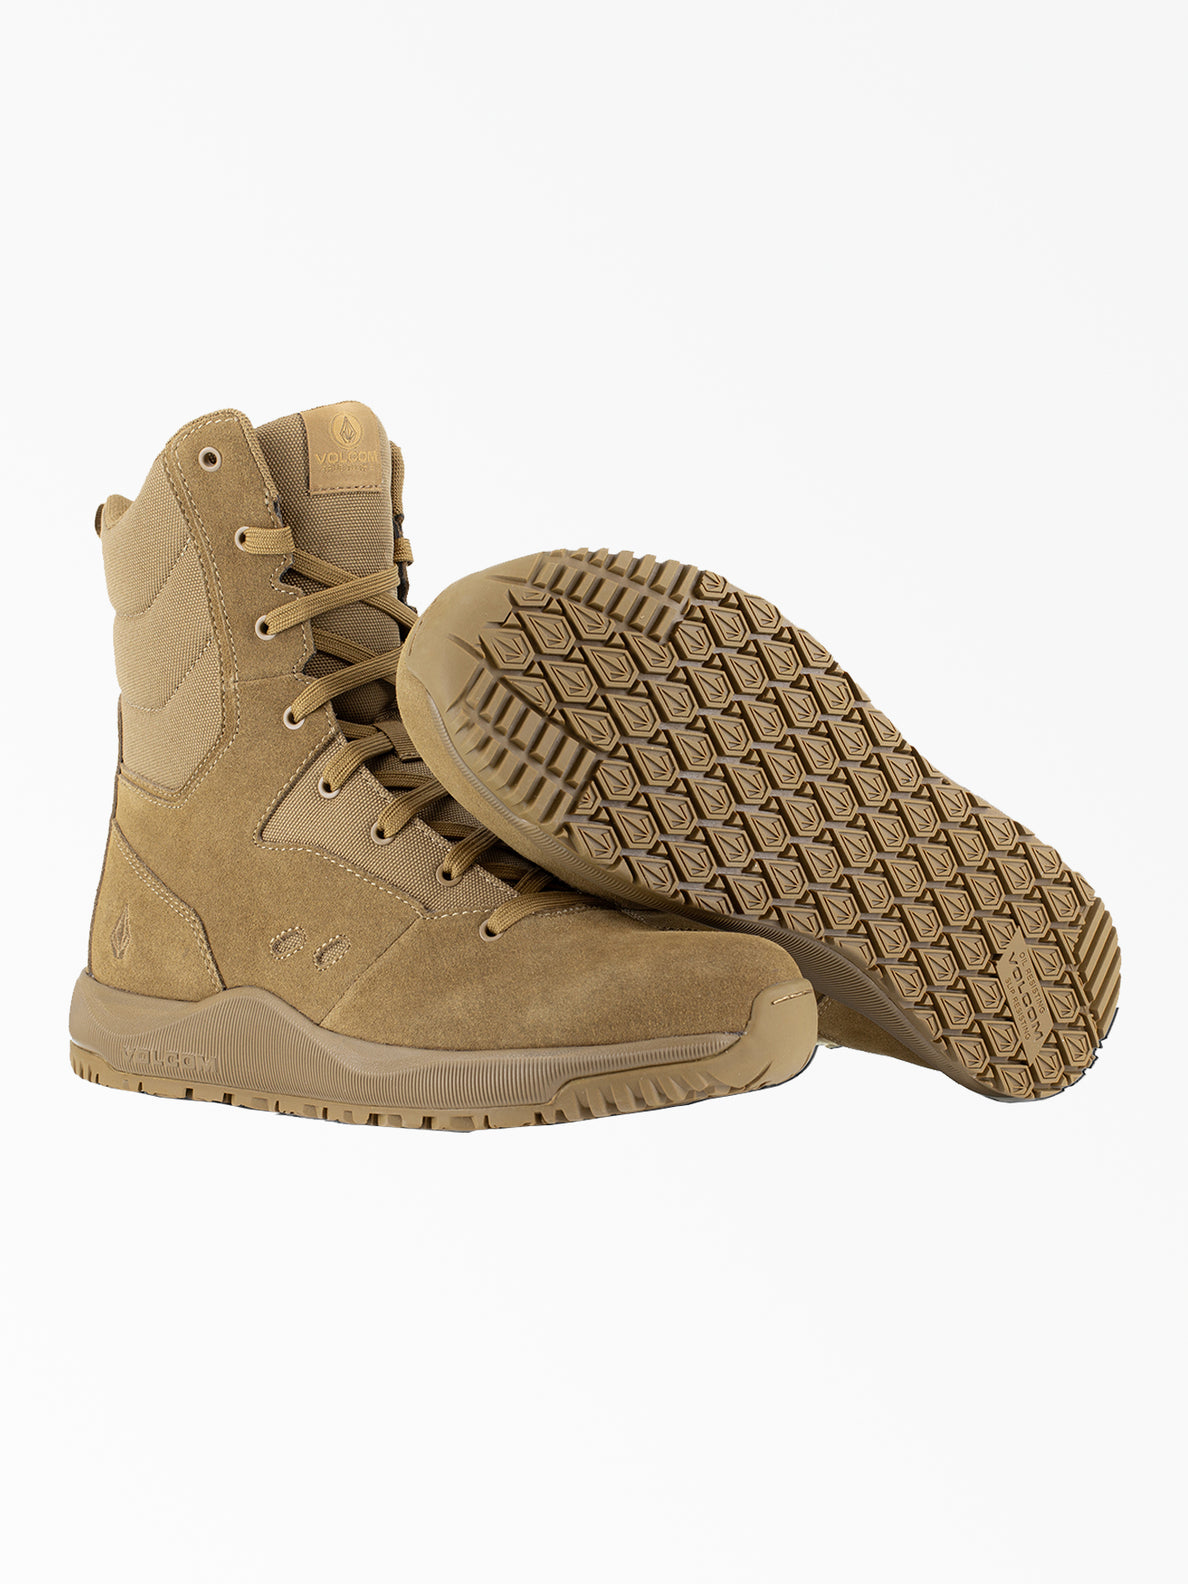 Workwear Stone Force Shoes - Coyote